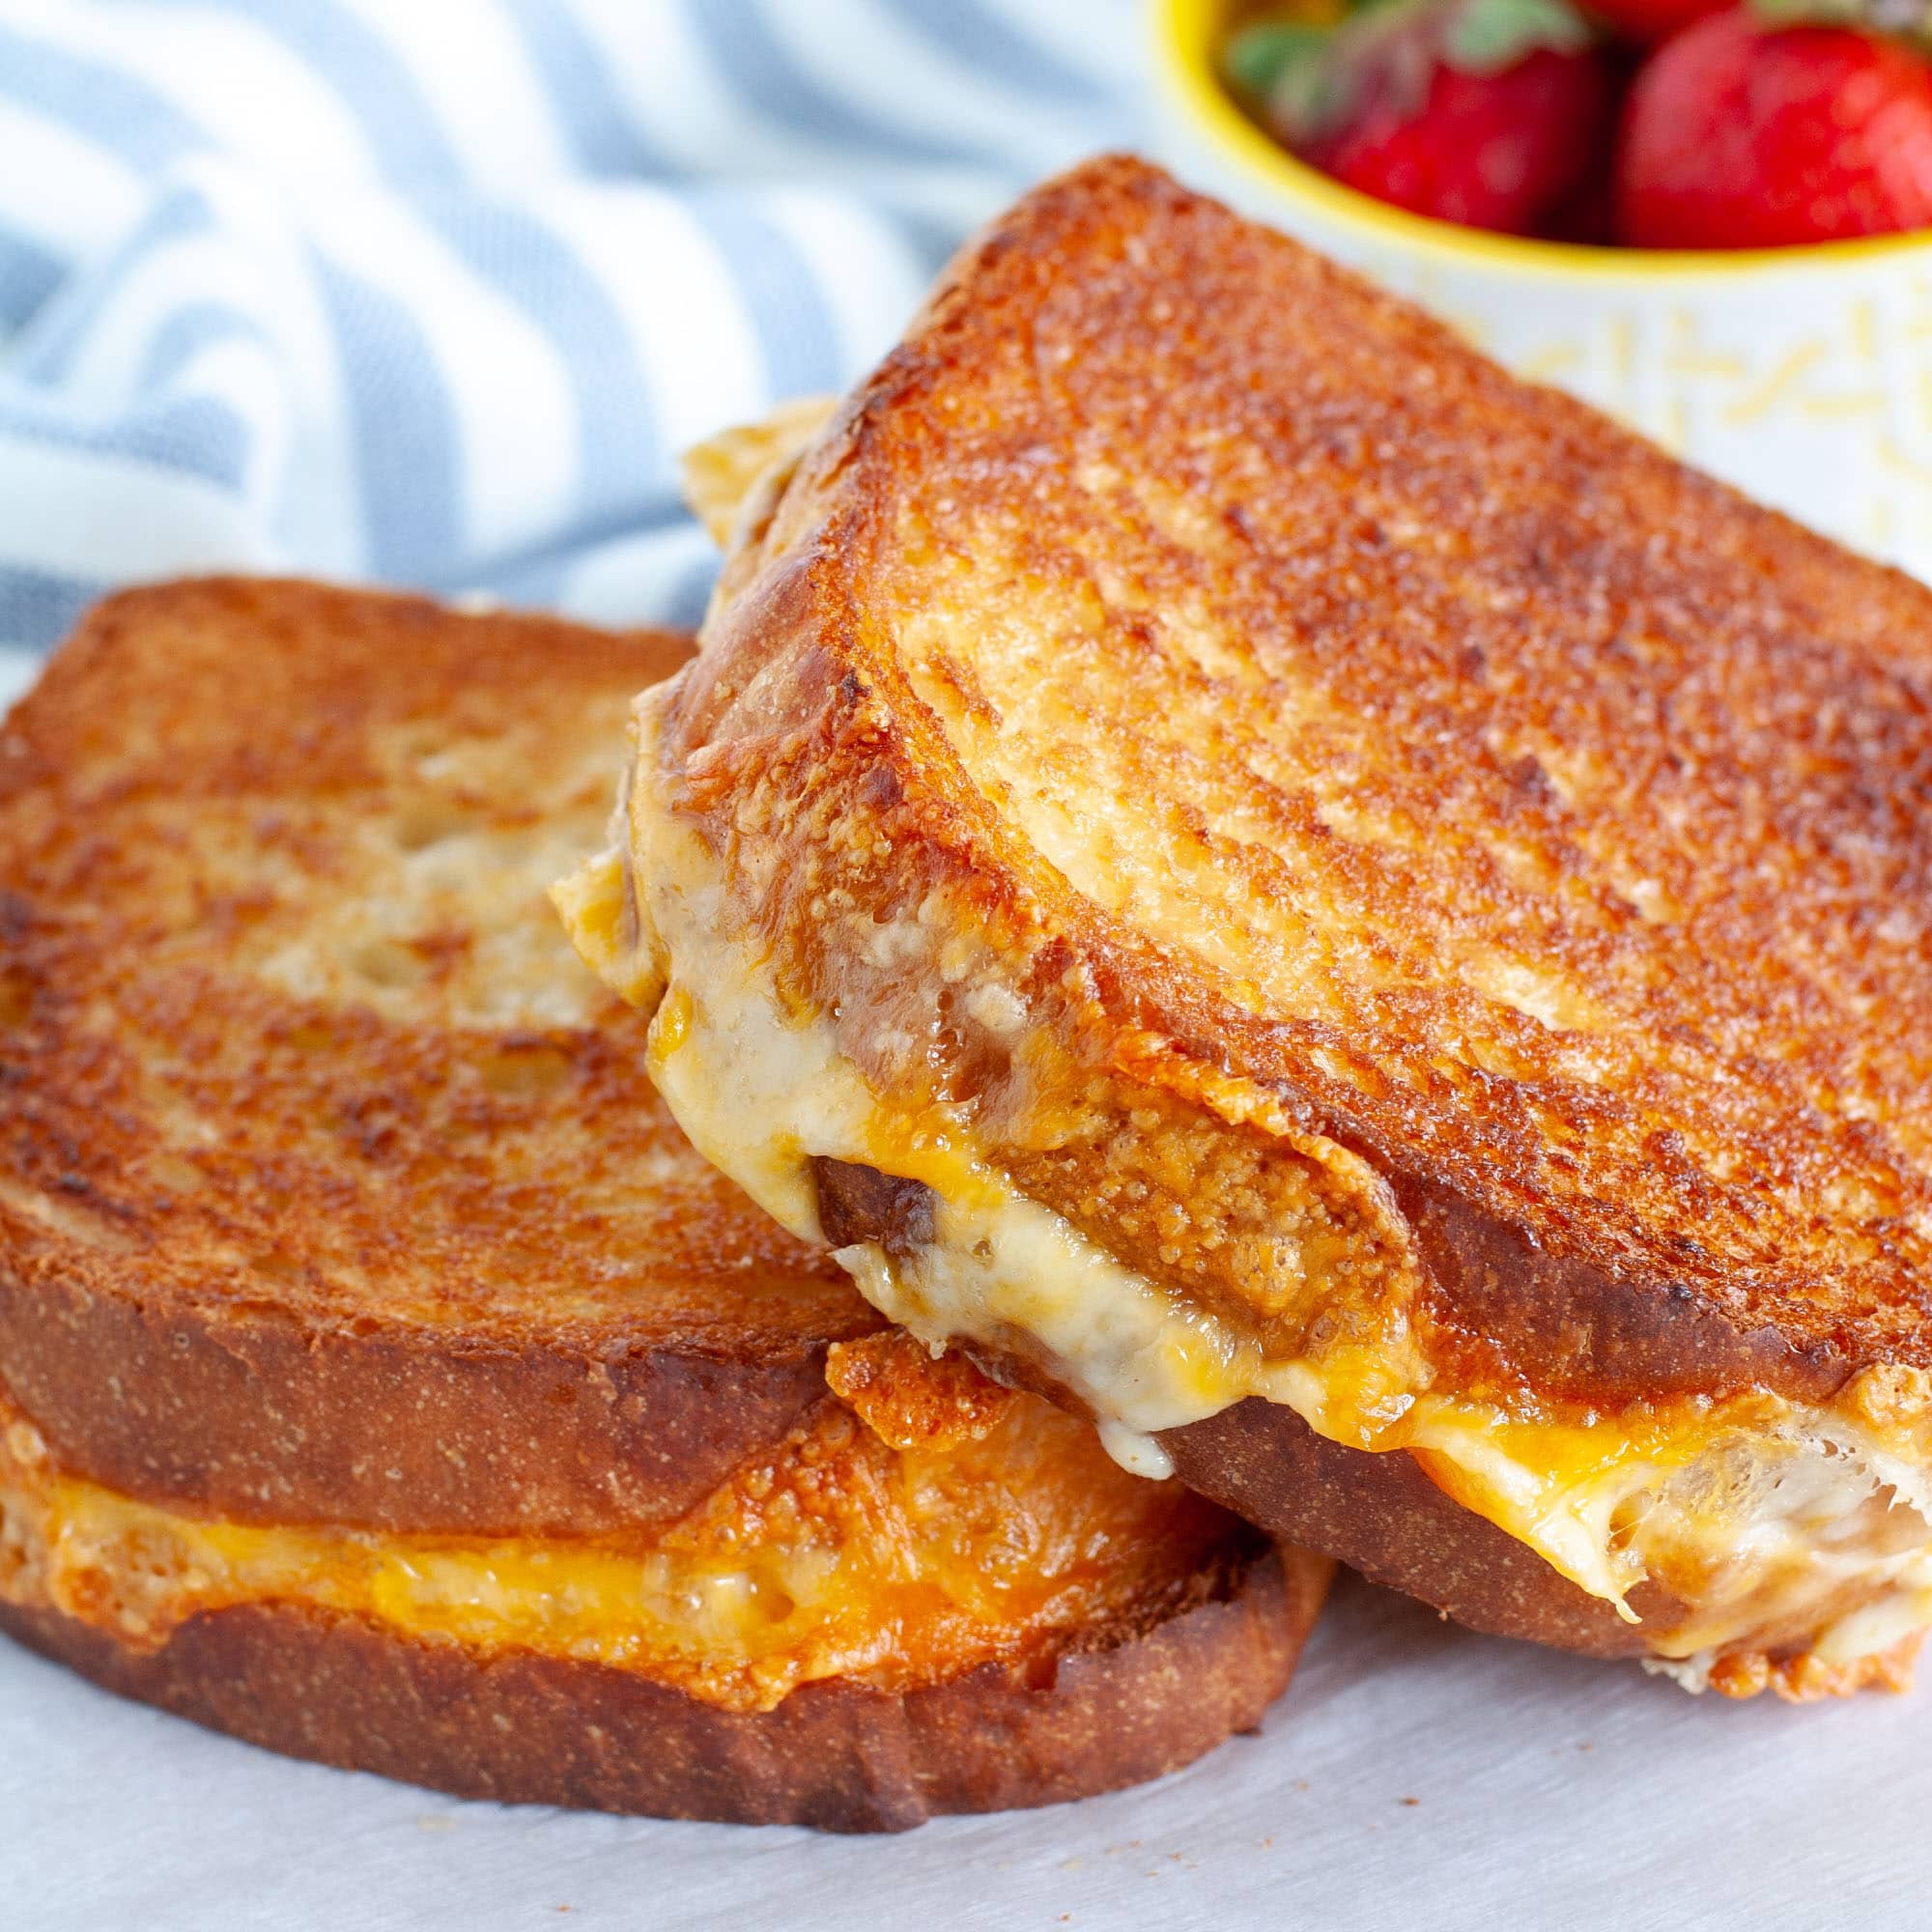 Grilled Cheese Sandwich Recipe (3 Tips, with Photos)